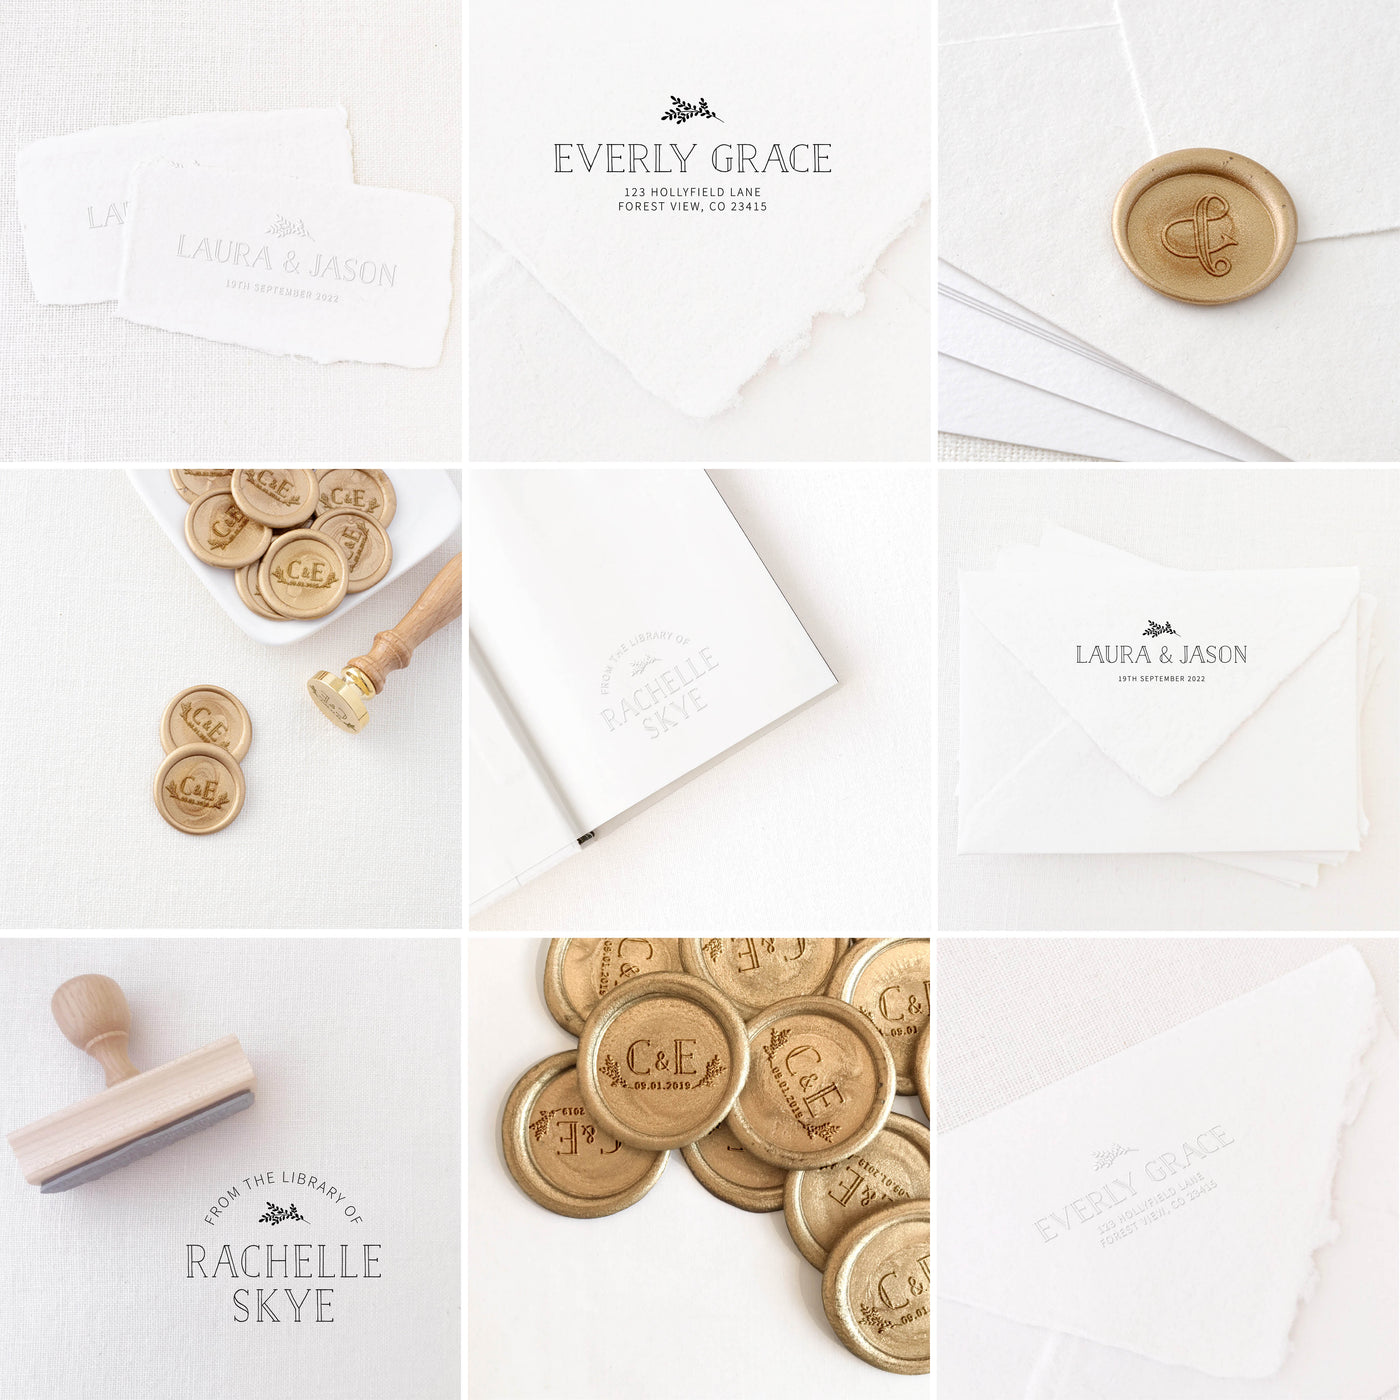 Everly Botanical Classic Engraved Collection | Custom Rubber Stamp, Wax Seal Stickers & Embosser for Custom Luxe Embellishment Packaging & Fine Art Wedding Stationery Invitations | Heirloom Seals